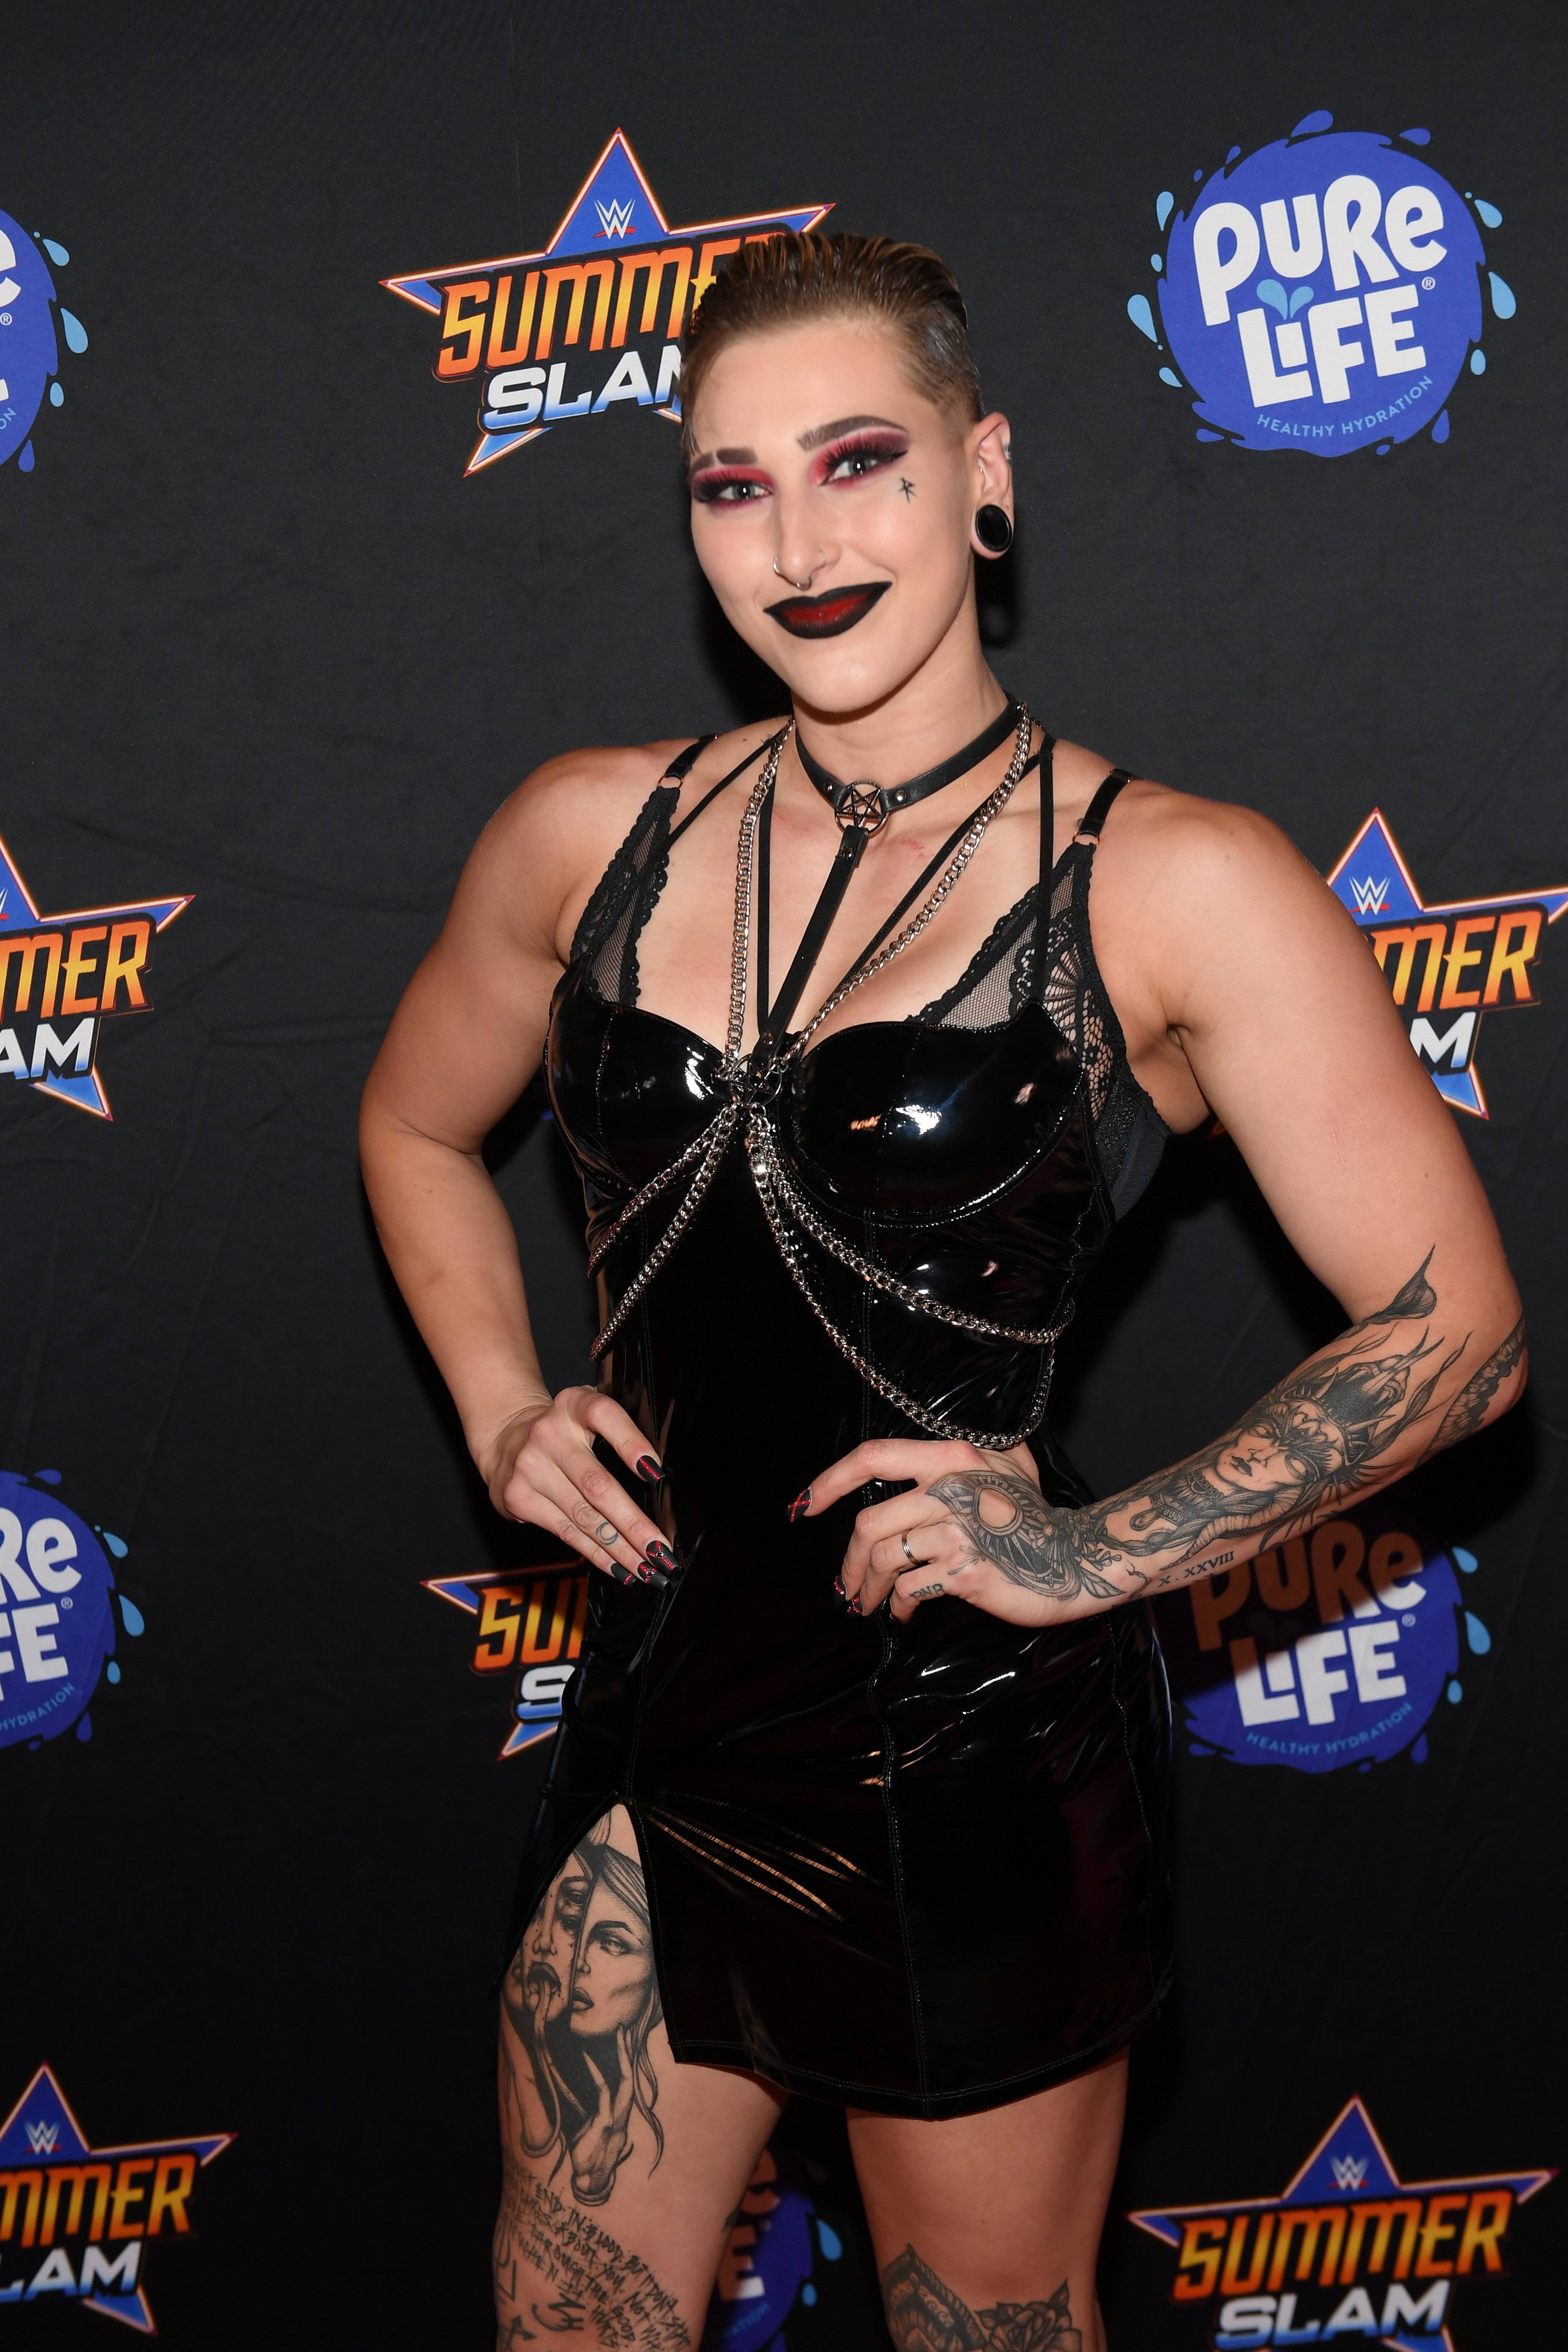 Professional wrestler Rhea Ripley attends the WWE SummerSlam after party at Delano Las Vegas at Mandalay Bay Resort and Casino on August 21, 2021 in Las Vegas, Nevada. | Source: Getty Images